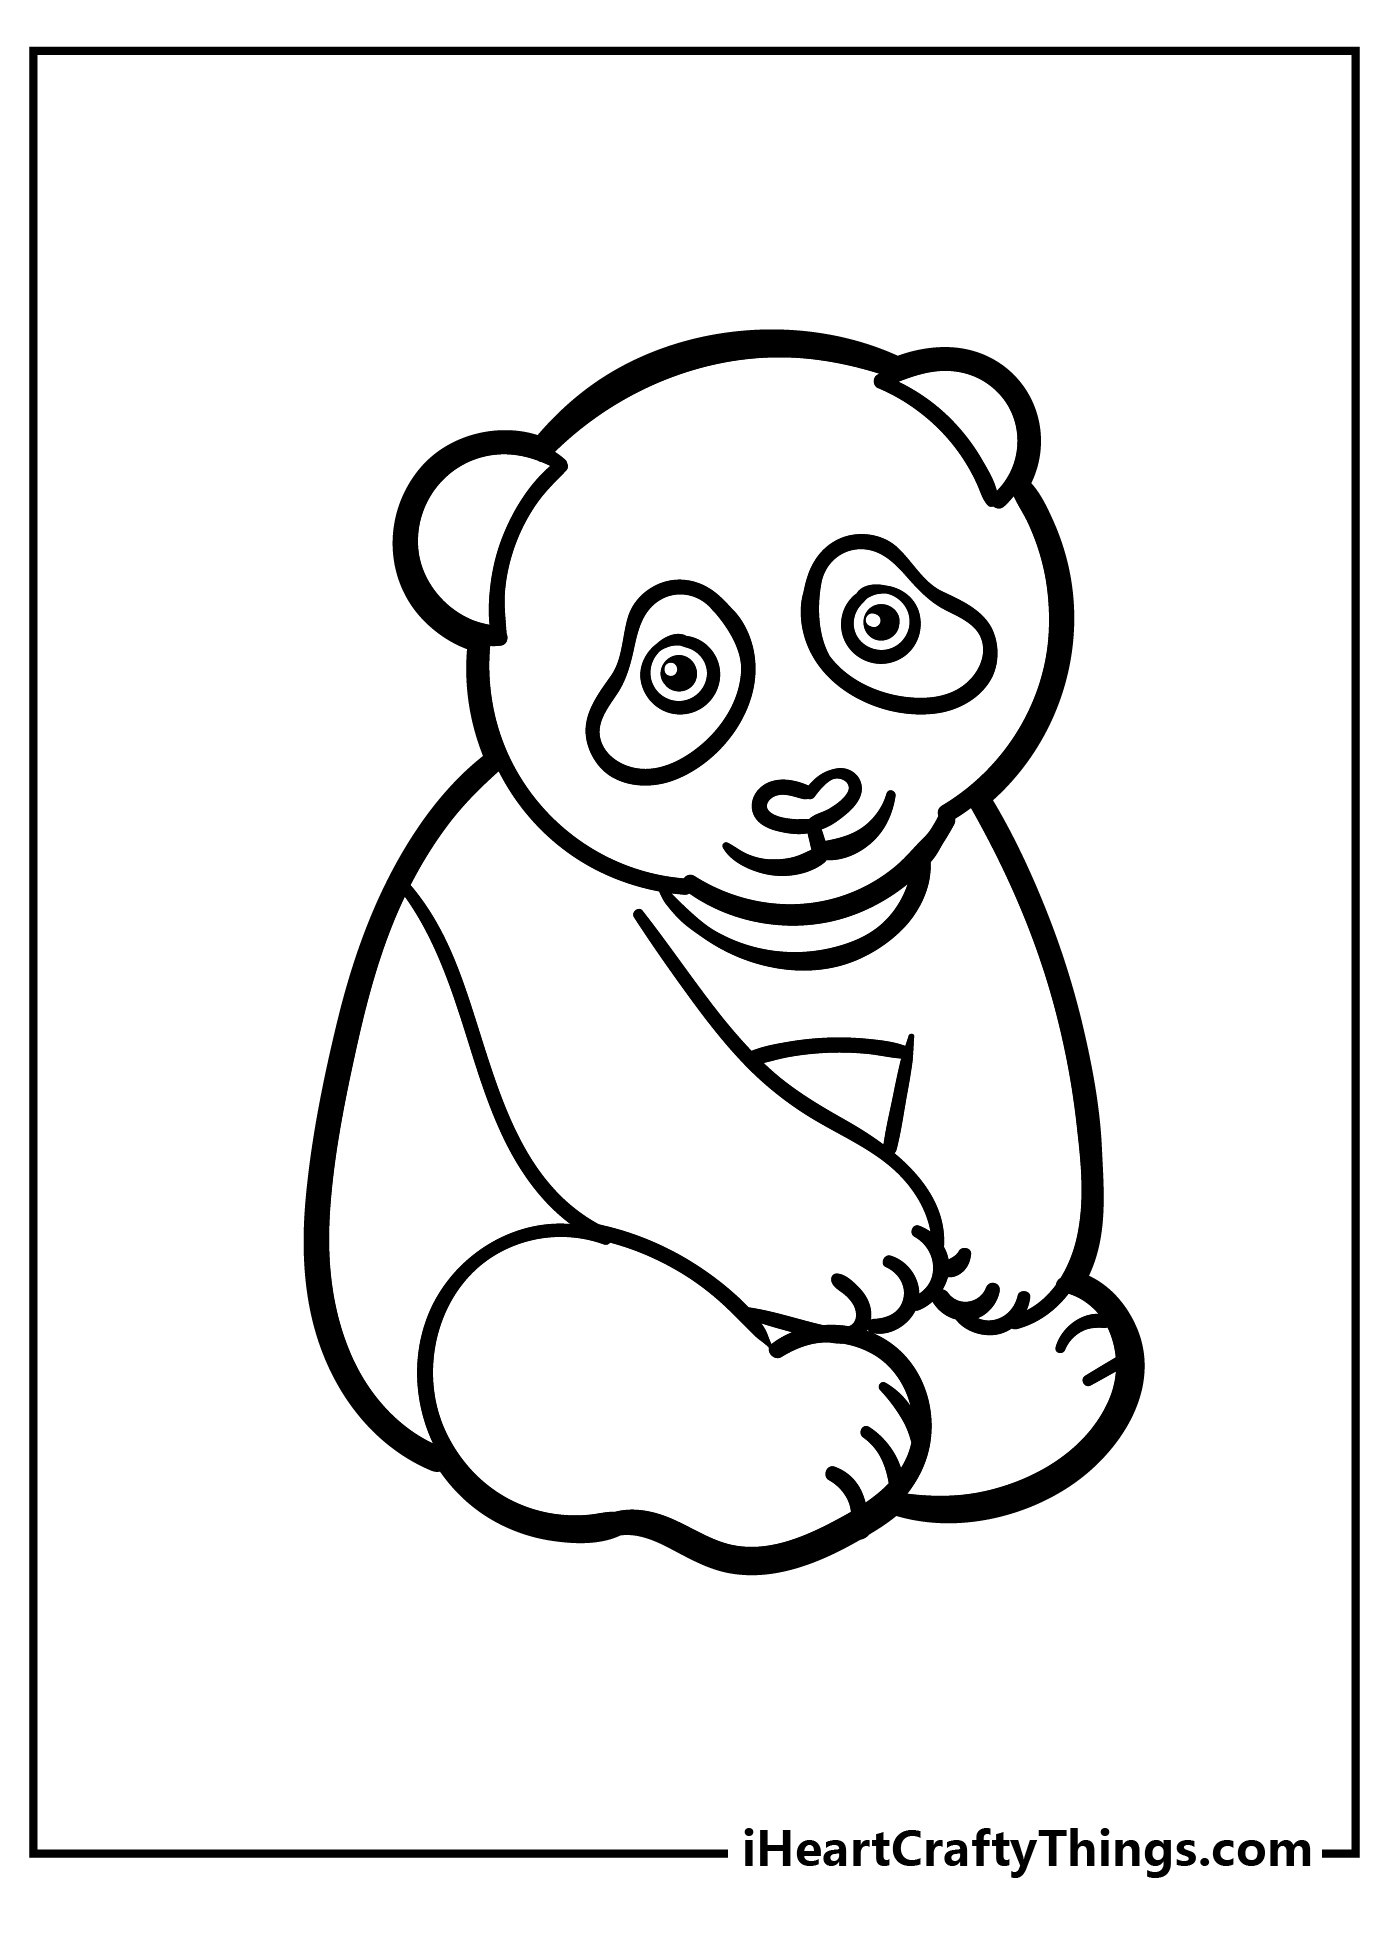 Panda Coloring Book for adults free download